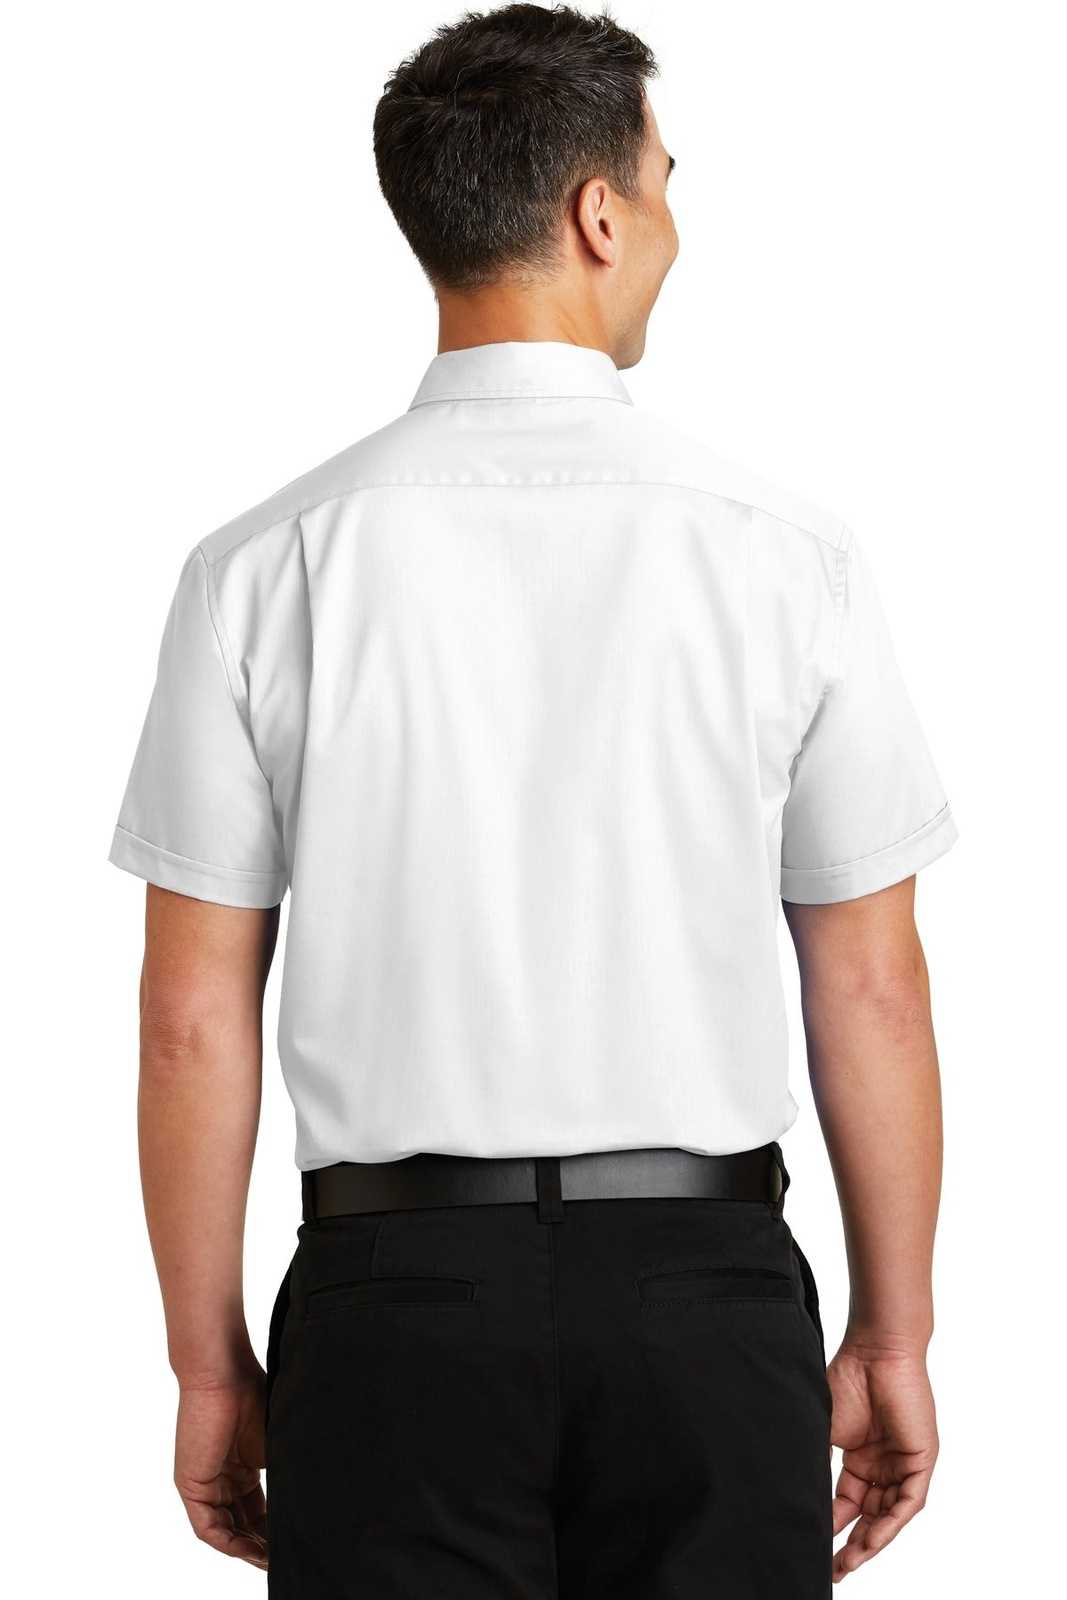 Port Authority S664 Short Sleeve Superpro Twill Shirt - White - HIT a Double - 2